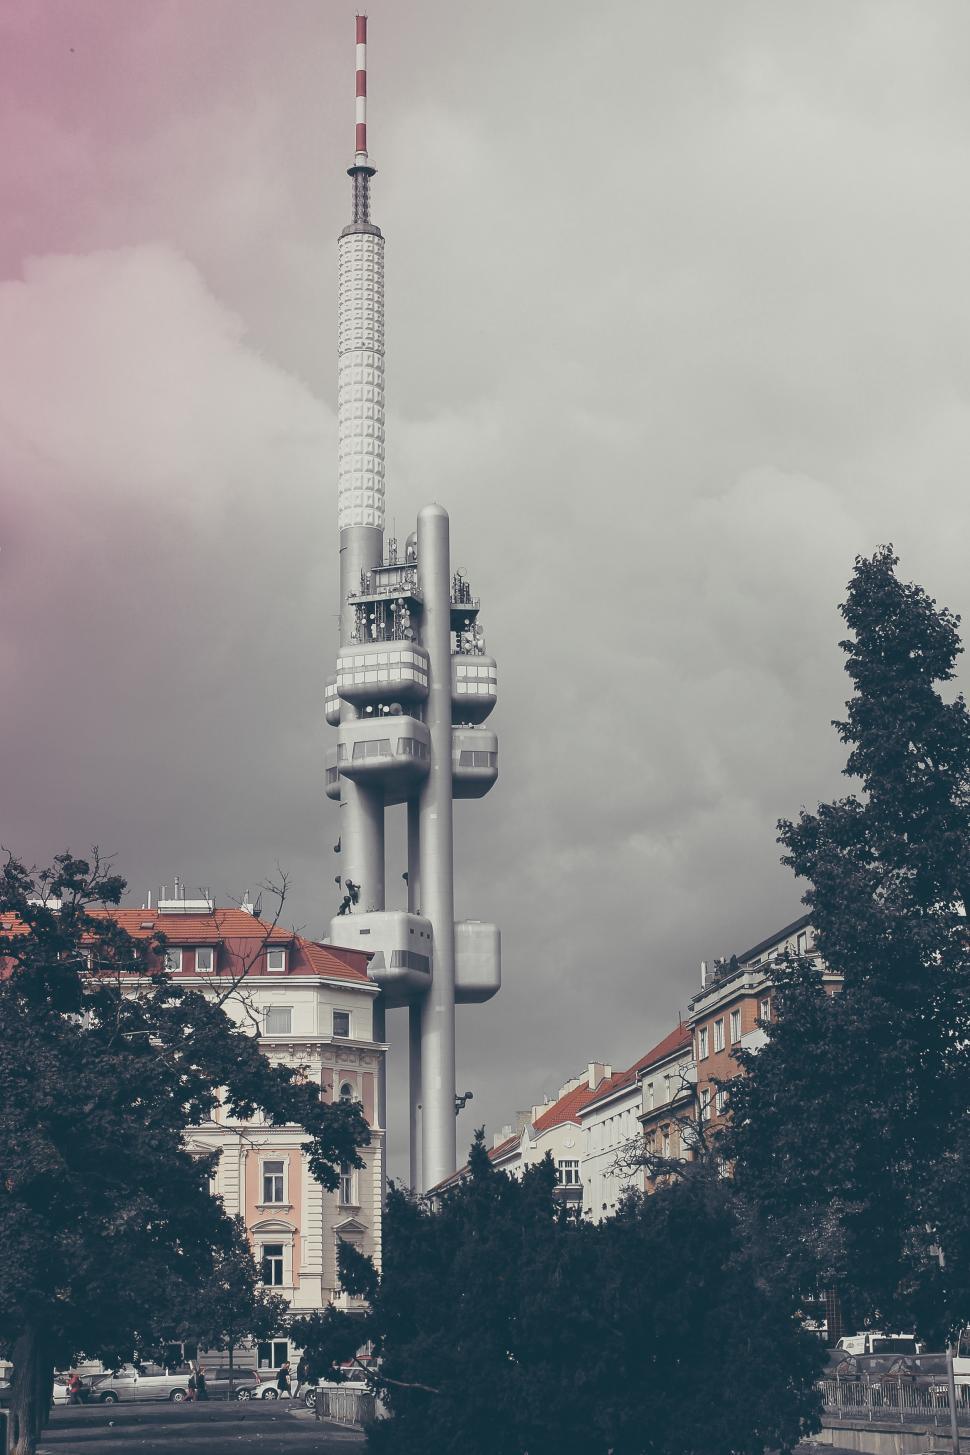 Free Image of Tower With Red and White Flag 